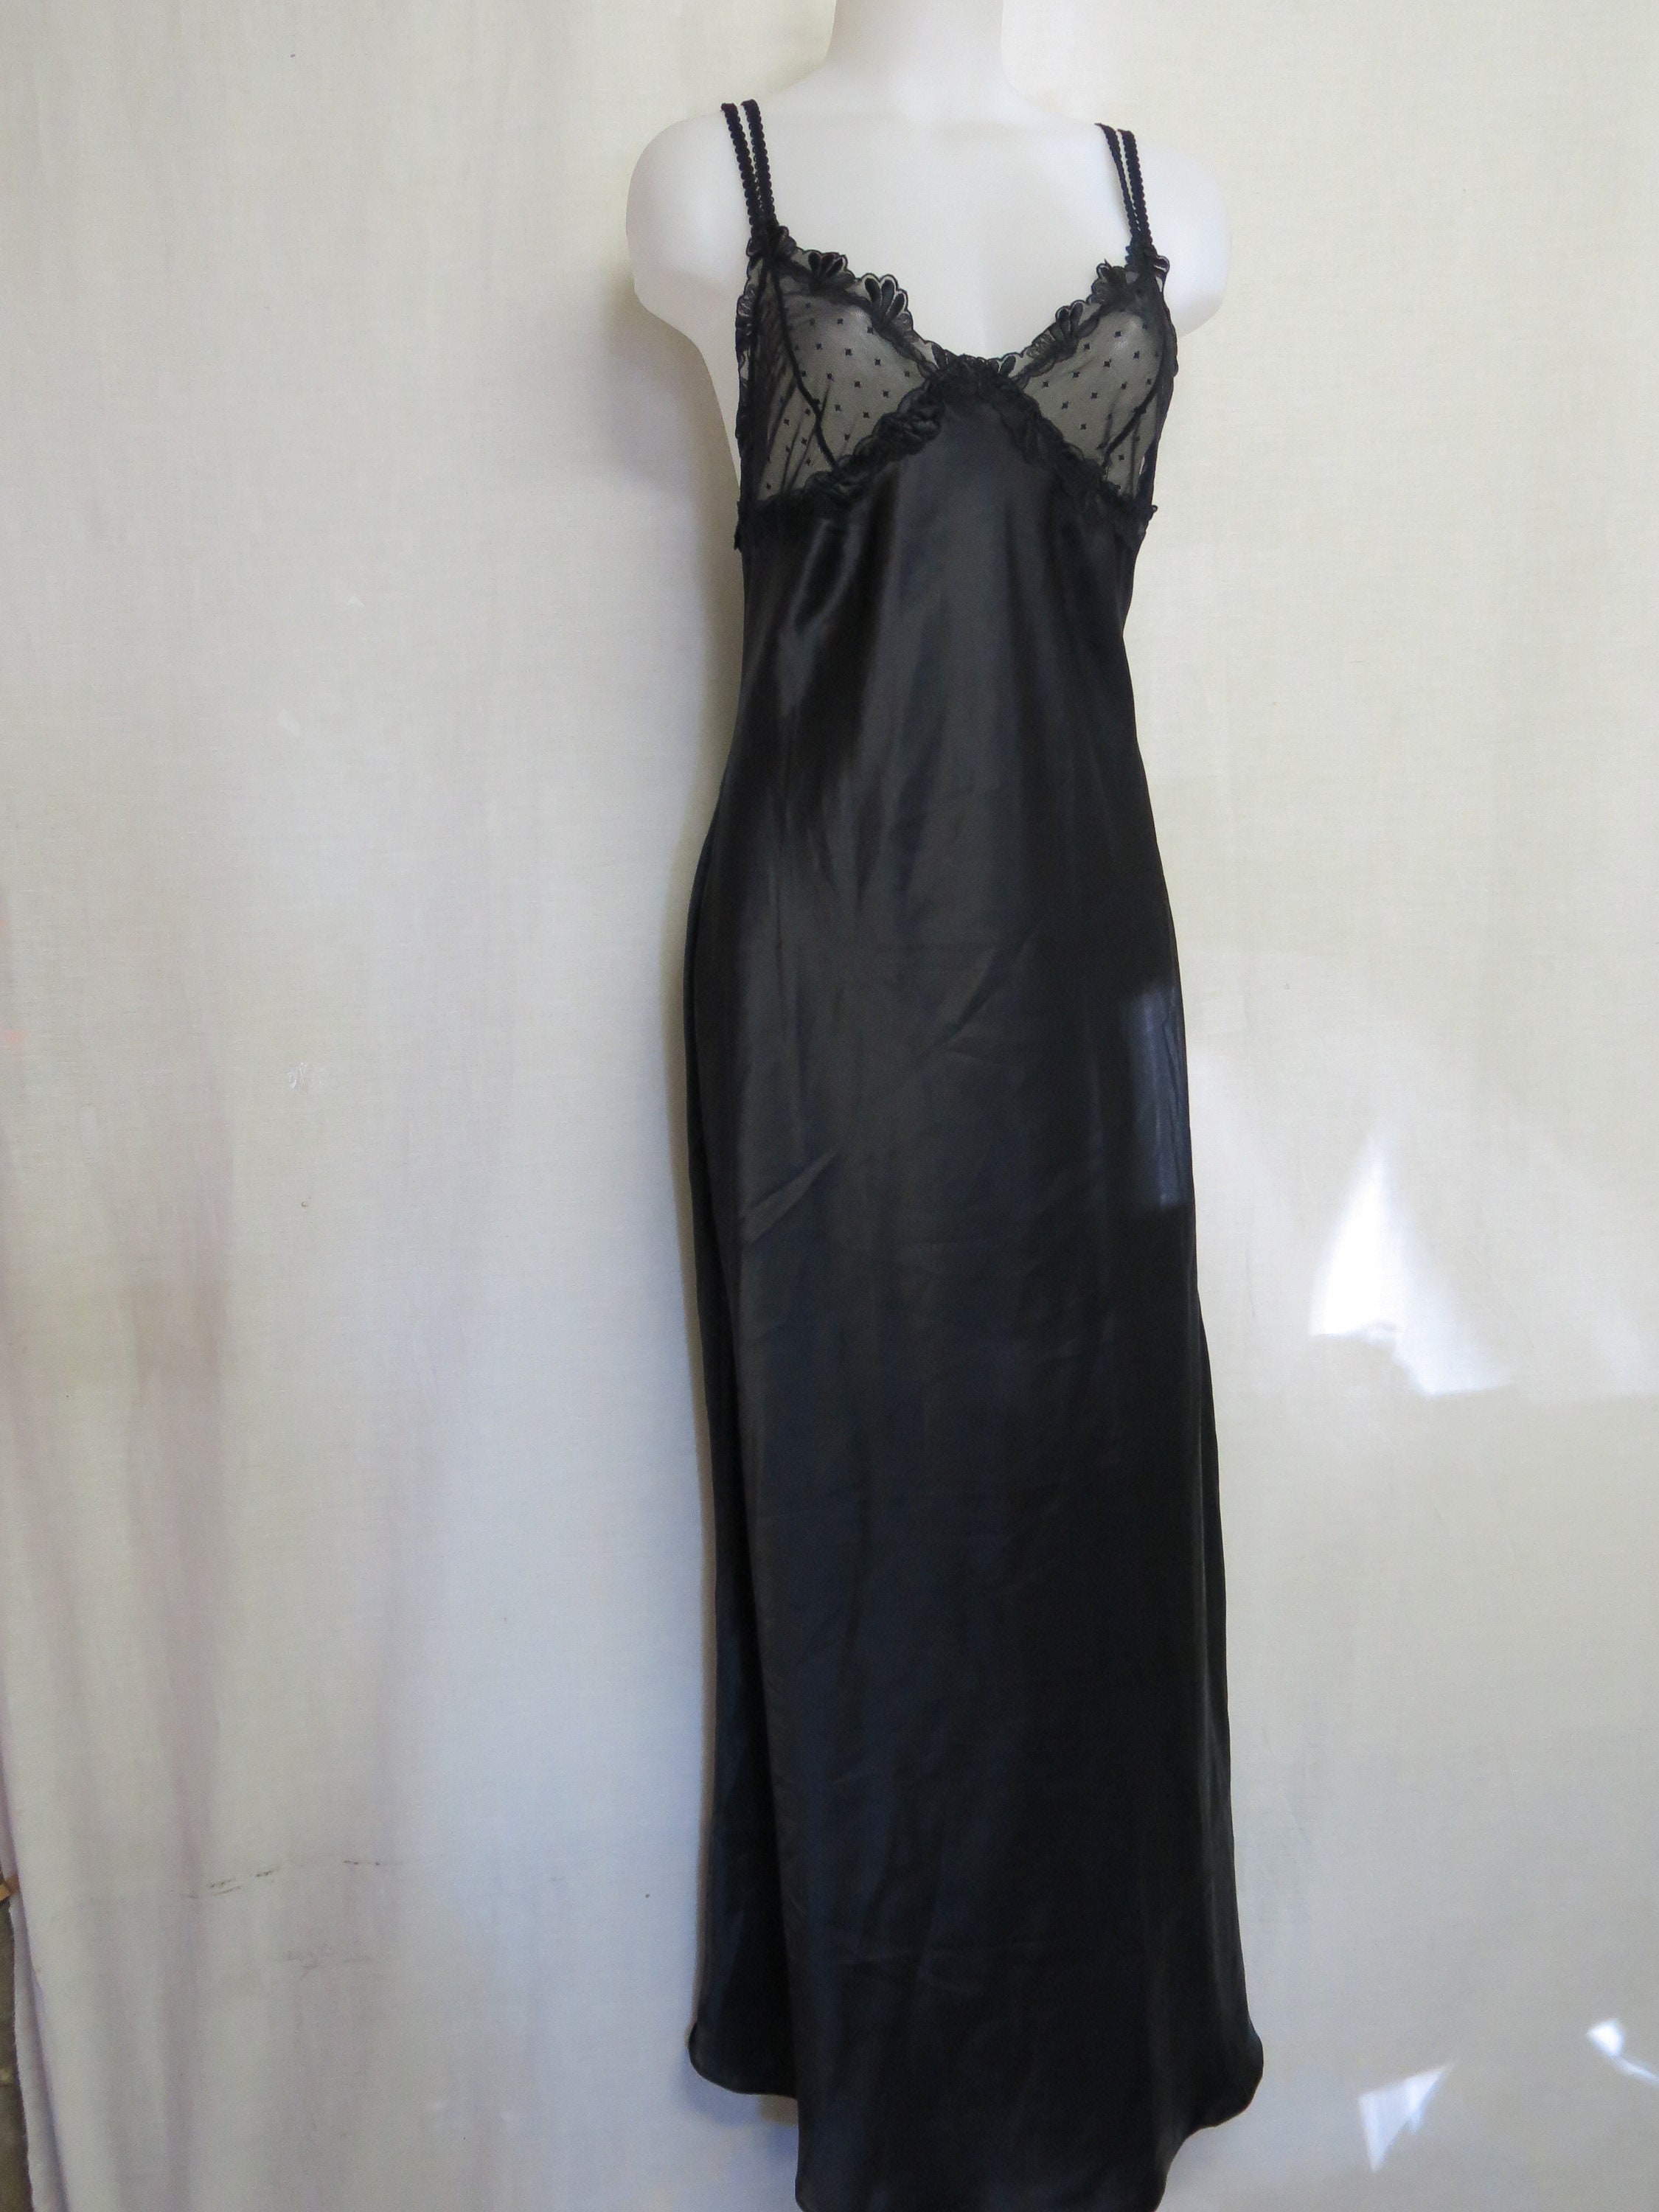 Sexy Black Satin Nightgown Black Lace Nightgown Low Cut Etsy